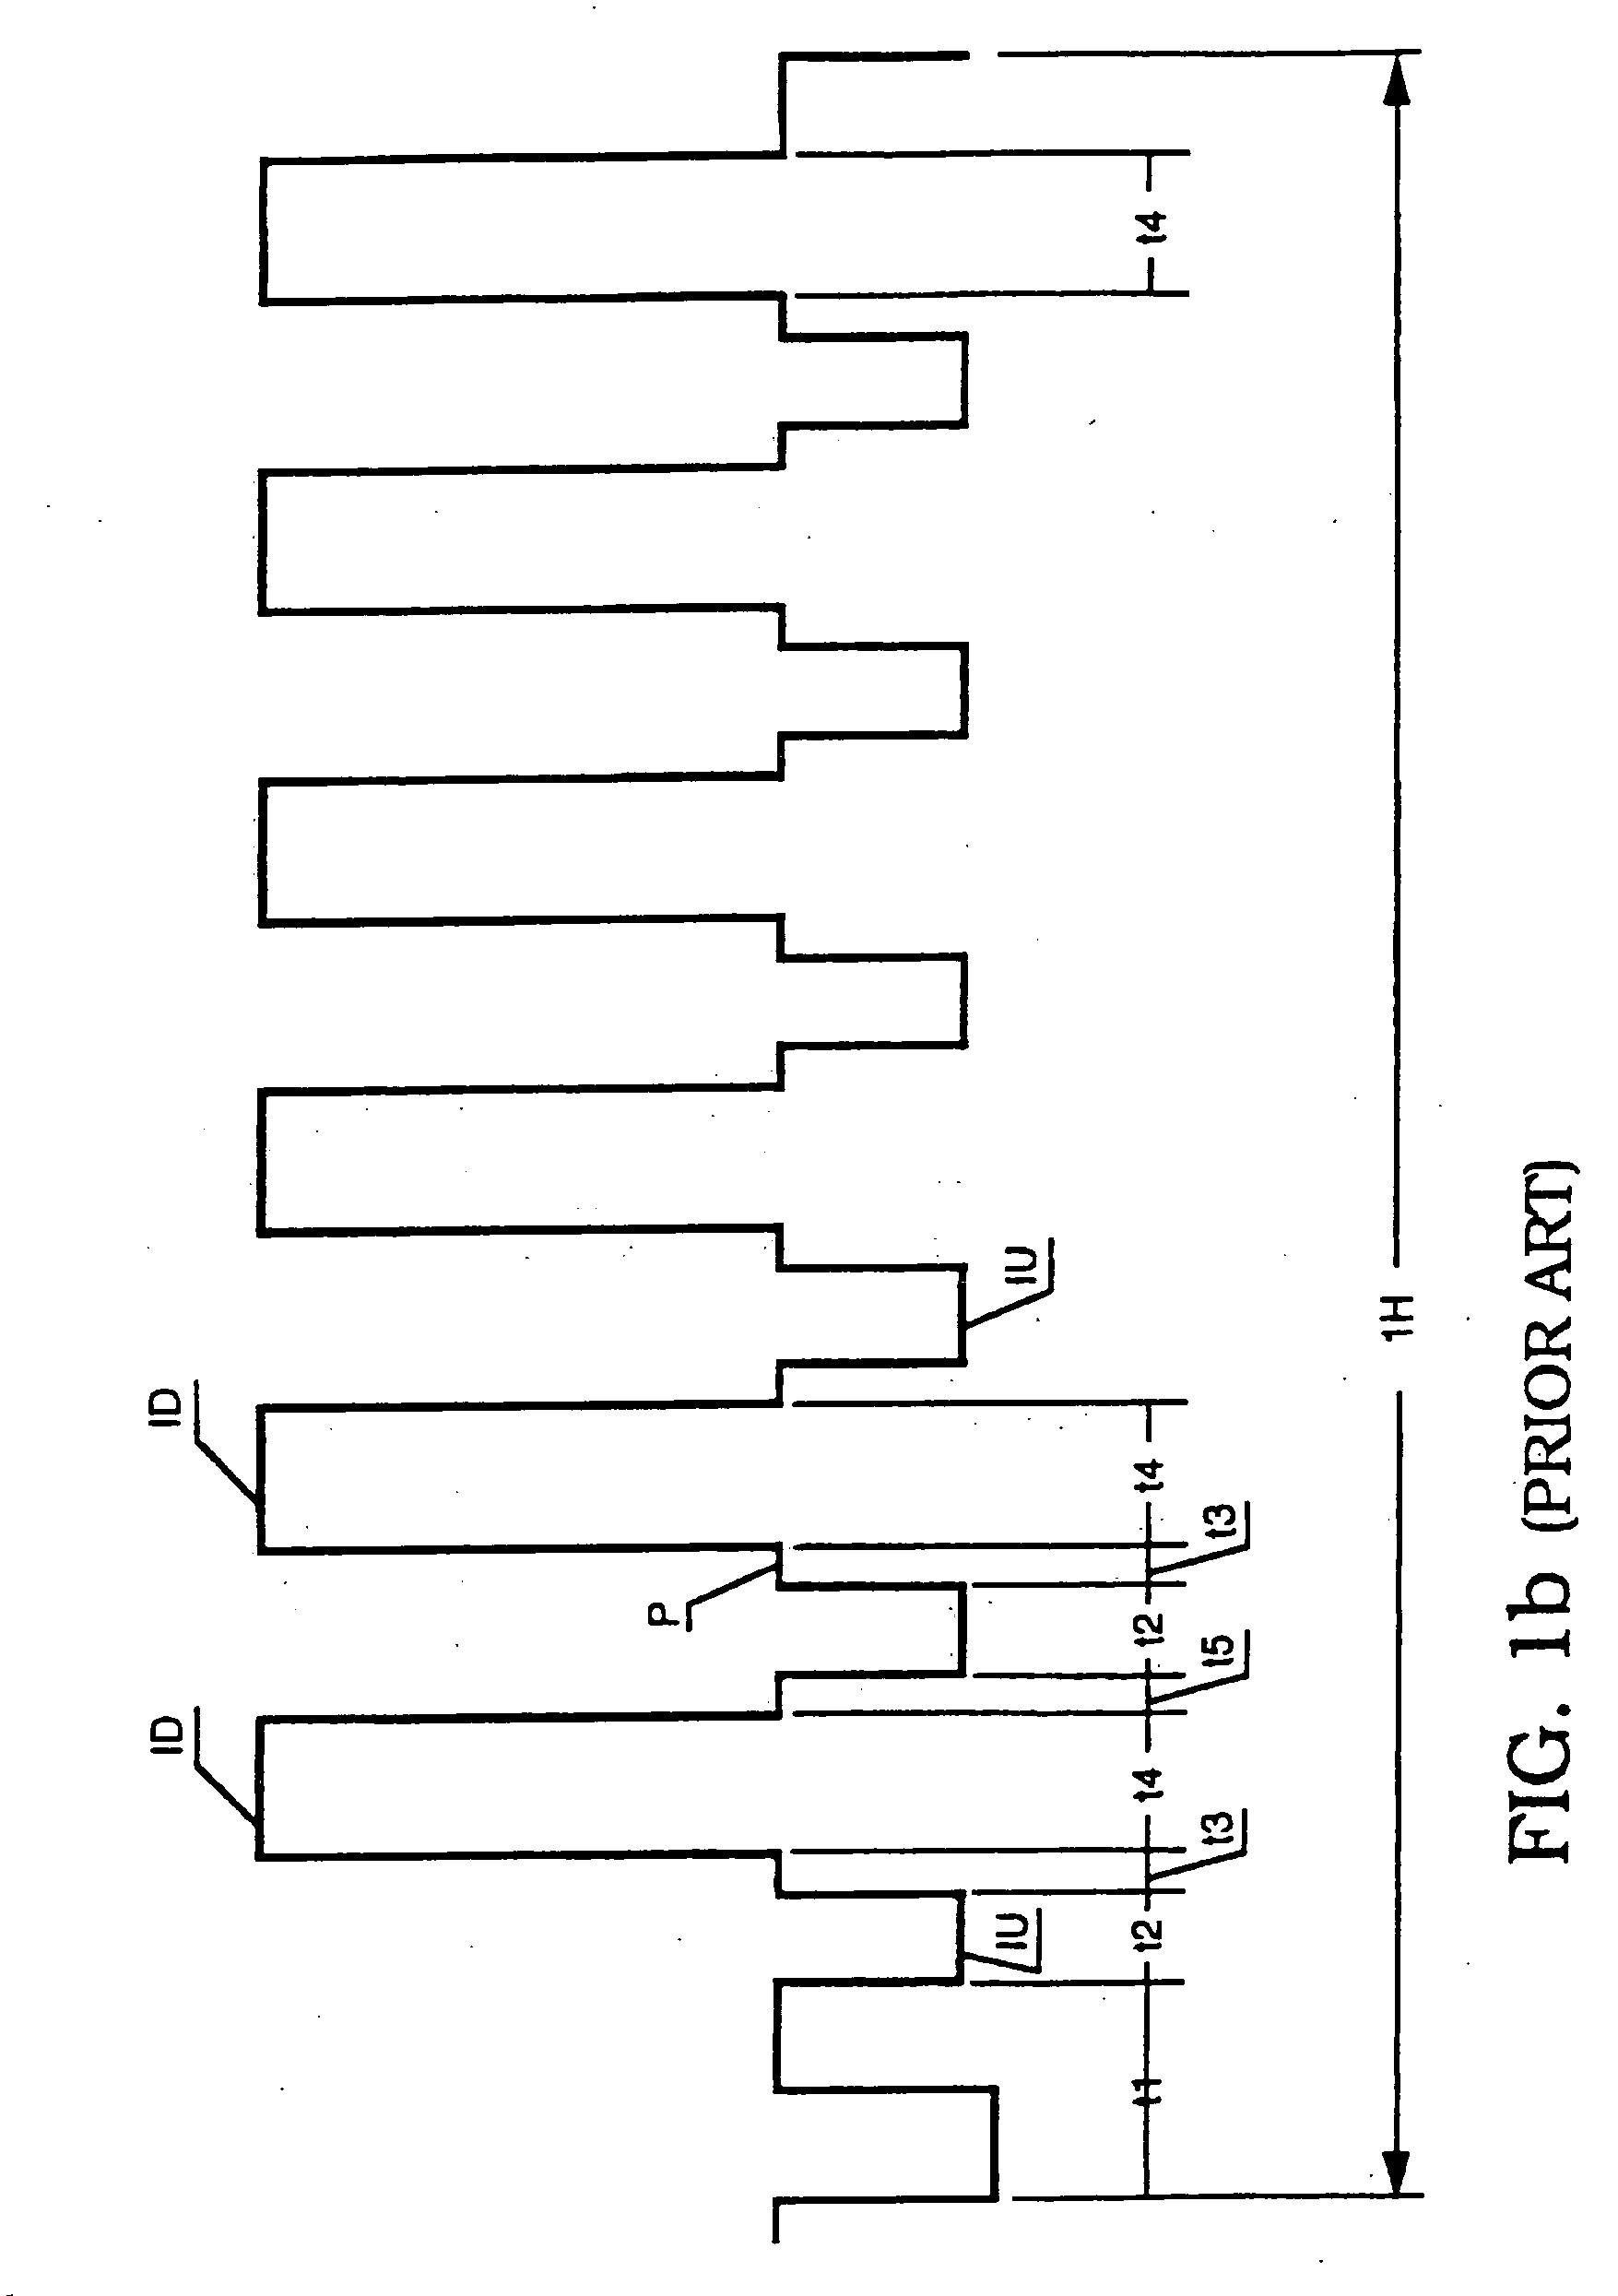 Method and apparatus to synthesize and defeat video copy protection signals